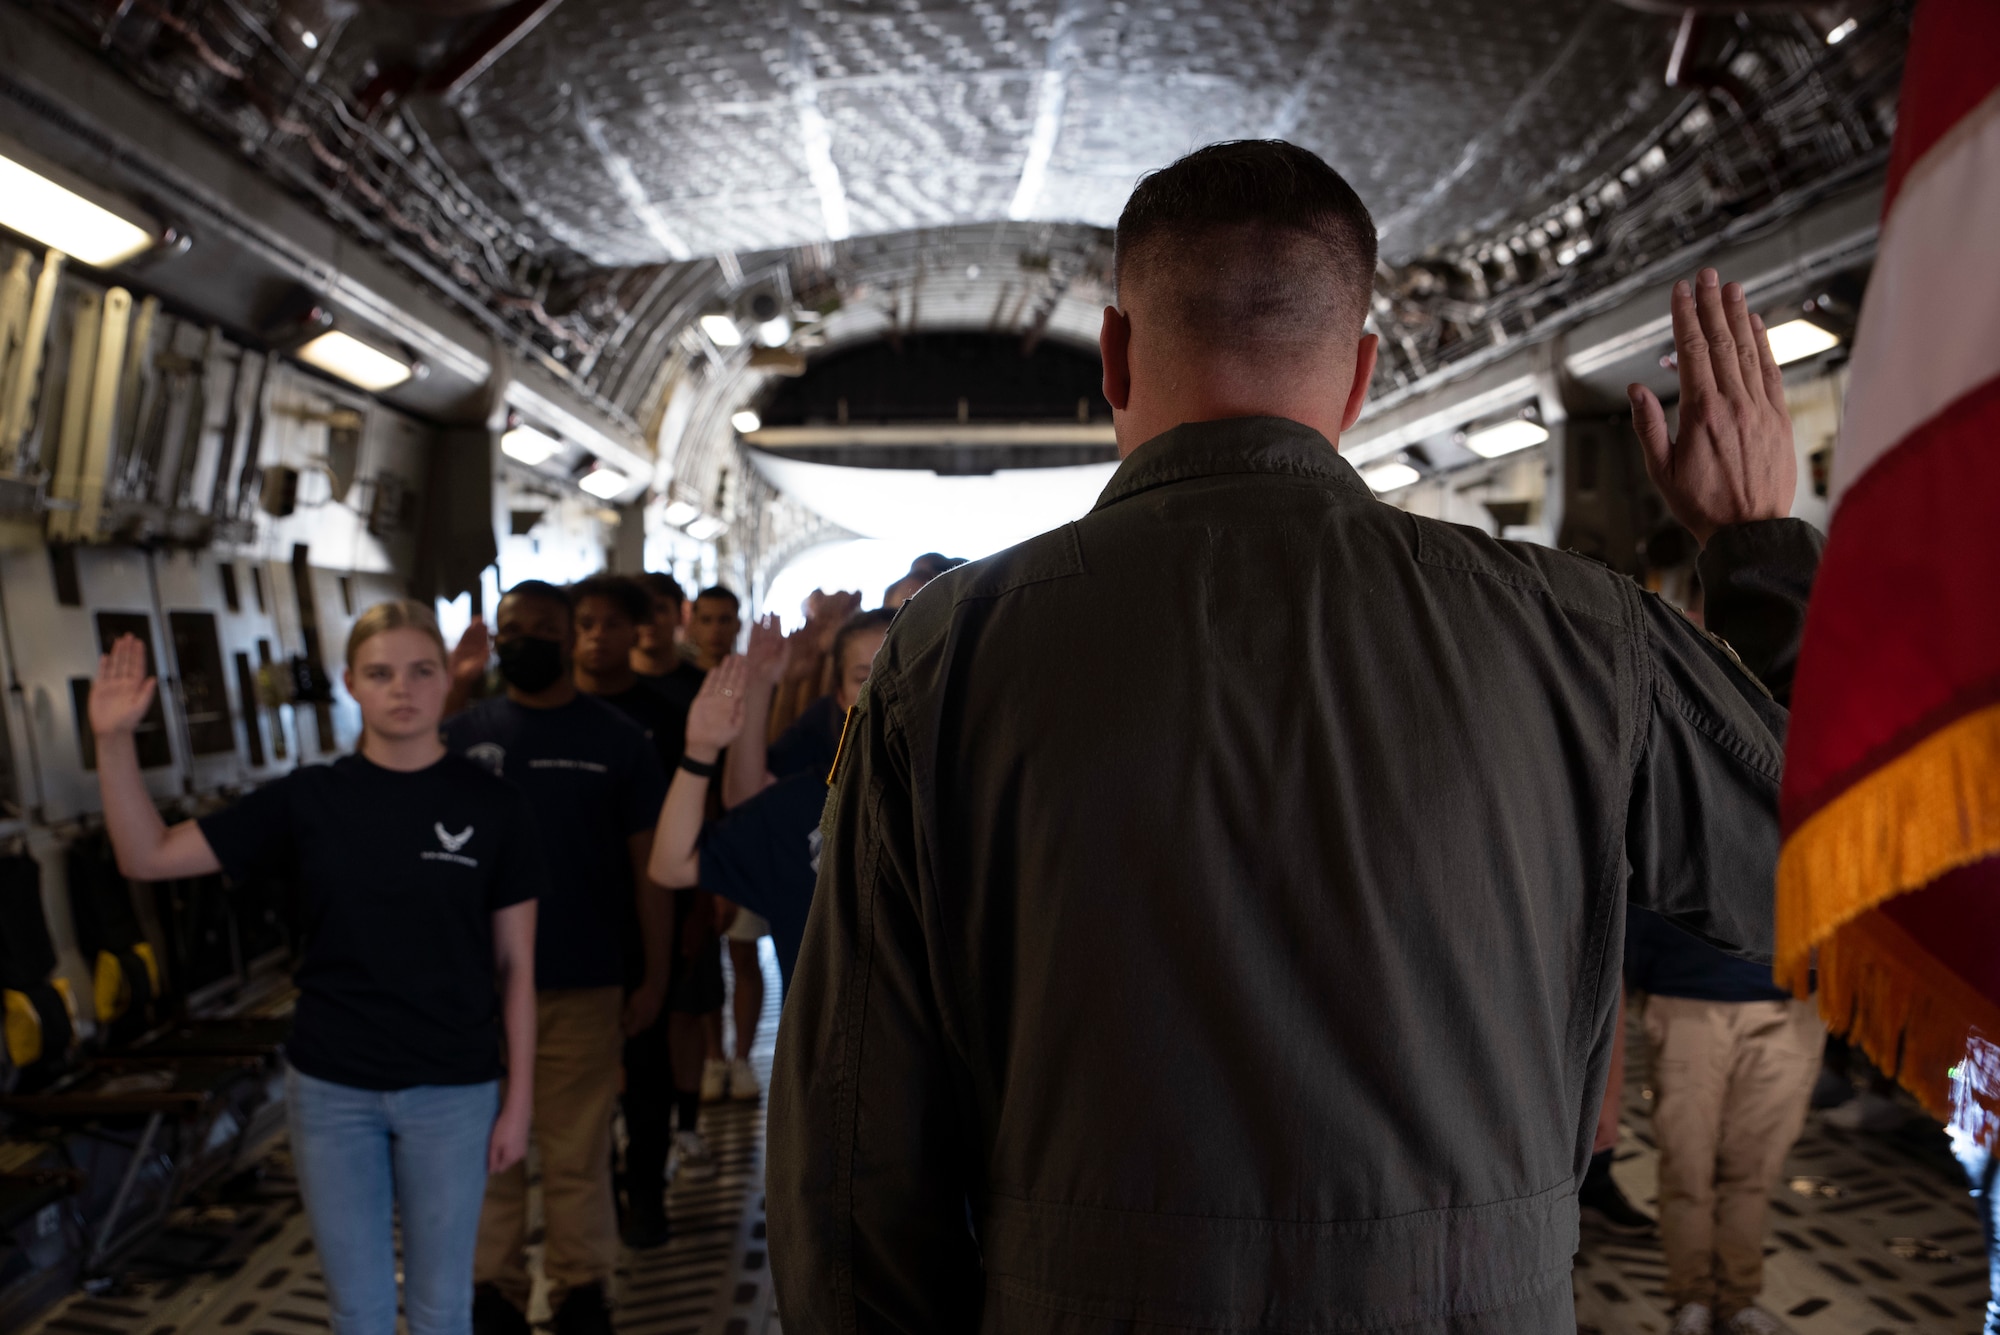 U.S. Air Force Col. David Fazenbaker, 62nd Airlift Wing commander, administers the oath of enlistment to future Airmen in the 361st Recruiting Squadron Delayed Entry Program on board a C-17 Globemaster III at Joint Base Lewis-McChord, Washington, July 23, 2021. The future Airmen, along with their recruiters visited several facilities at JBLM before touring a C-17 static display and taking their oath of enlistment. (U.S. Air Force photo by Senior Airman Zoe Thacker)